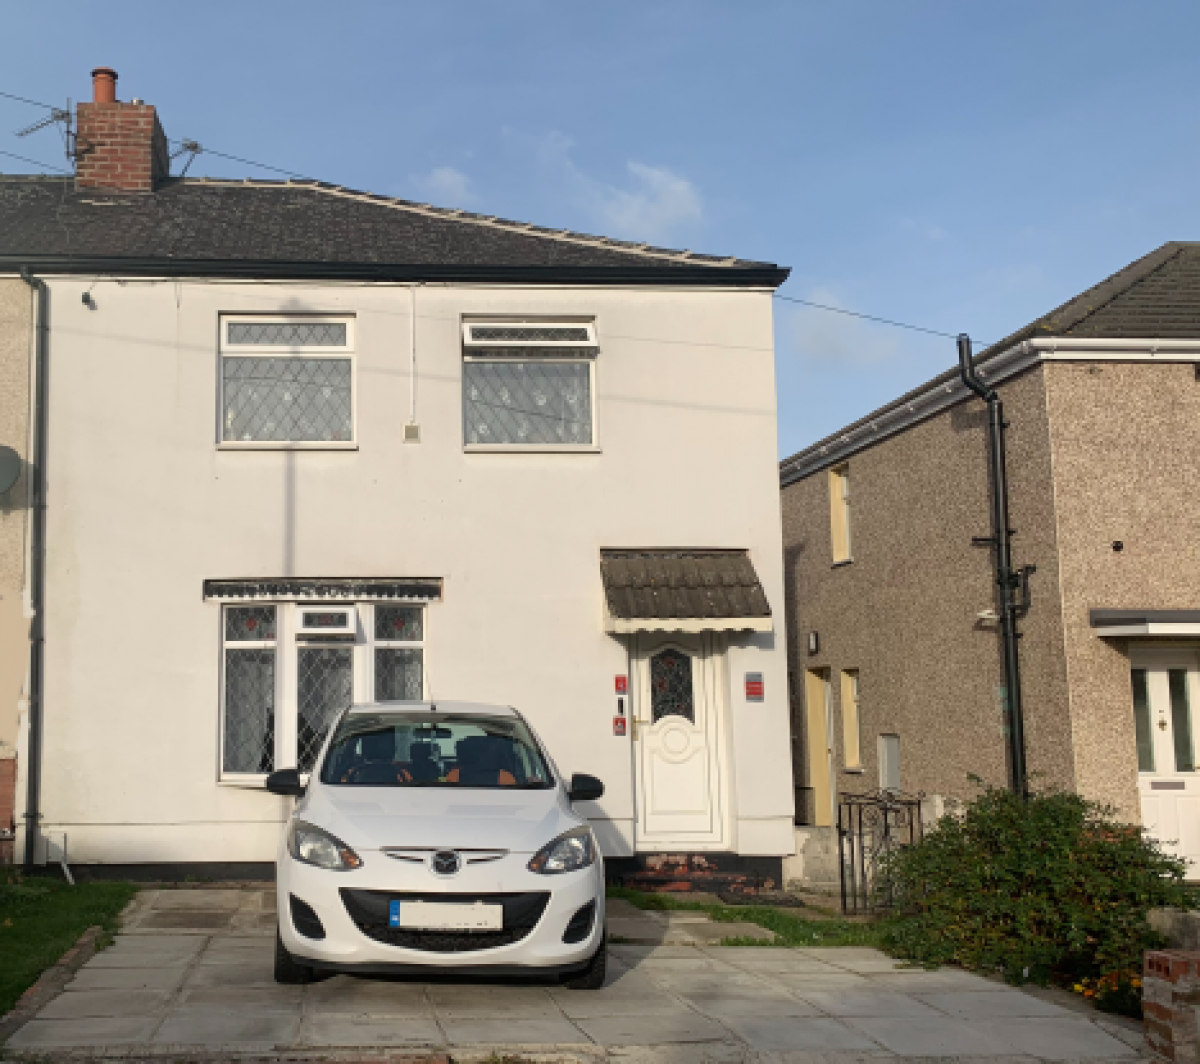 Picture of Home For Sale in Doncaster, South Yorkshire, United Kingdom